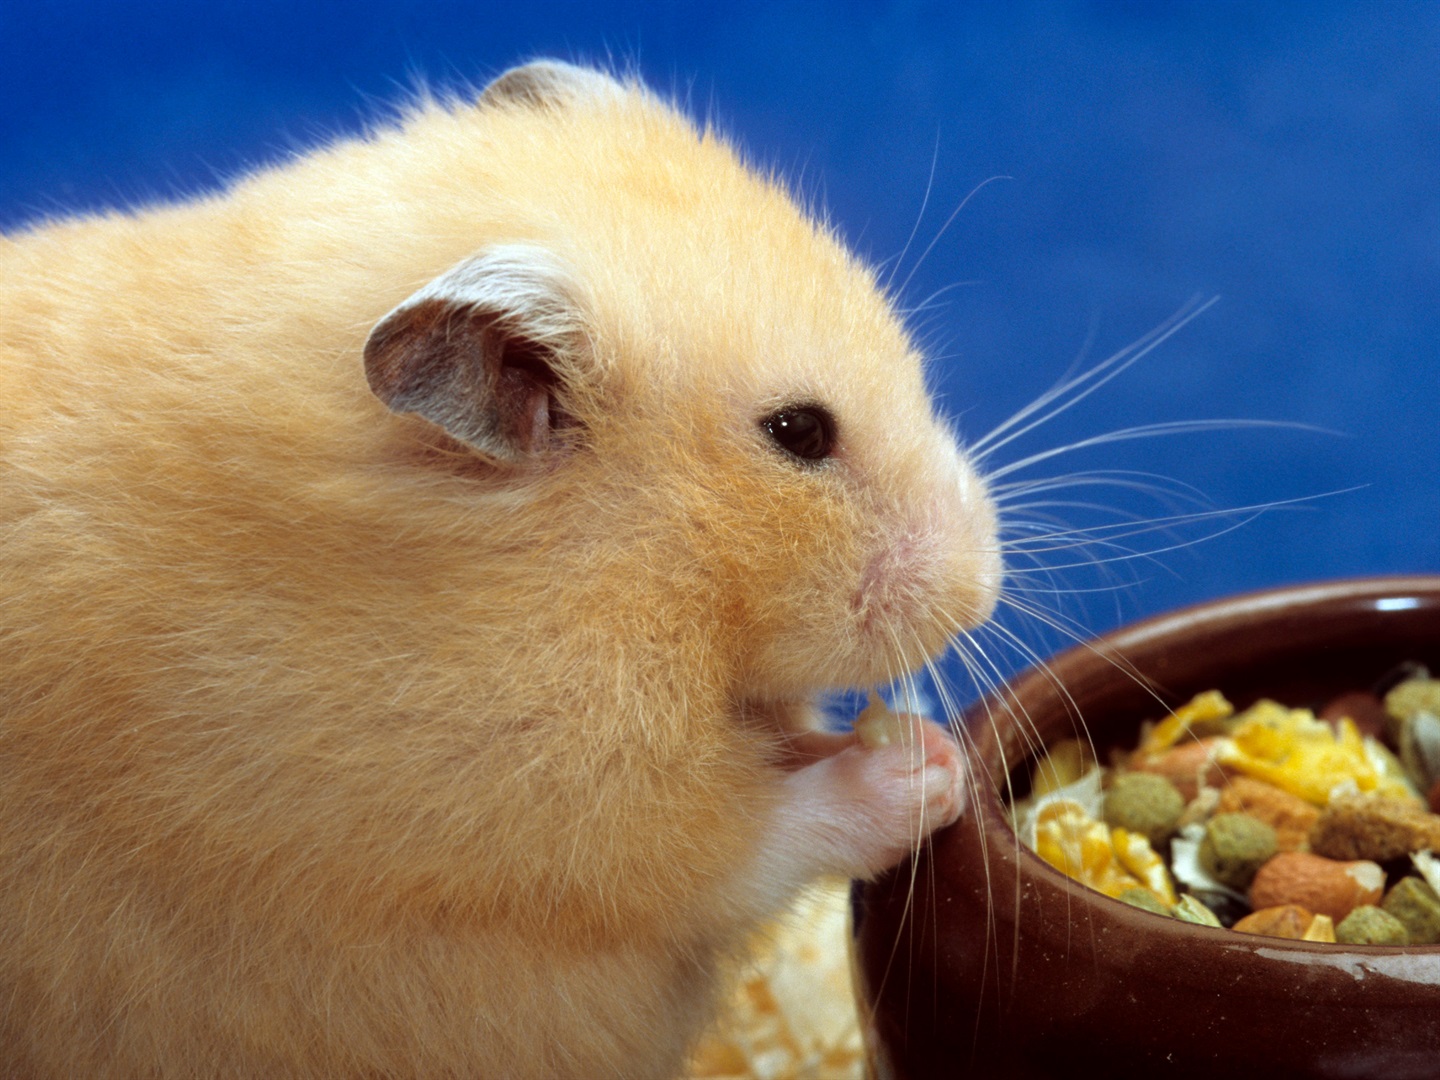 Hong Kong plans to cull around 2,000 hamsters, and is requesting that the city's residents hand over their pets, amid fears that the rodents might pass COVID-19 to humans. Arterra/Universal Images Group via Getty Images